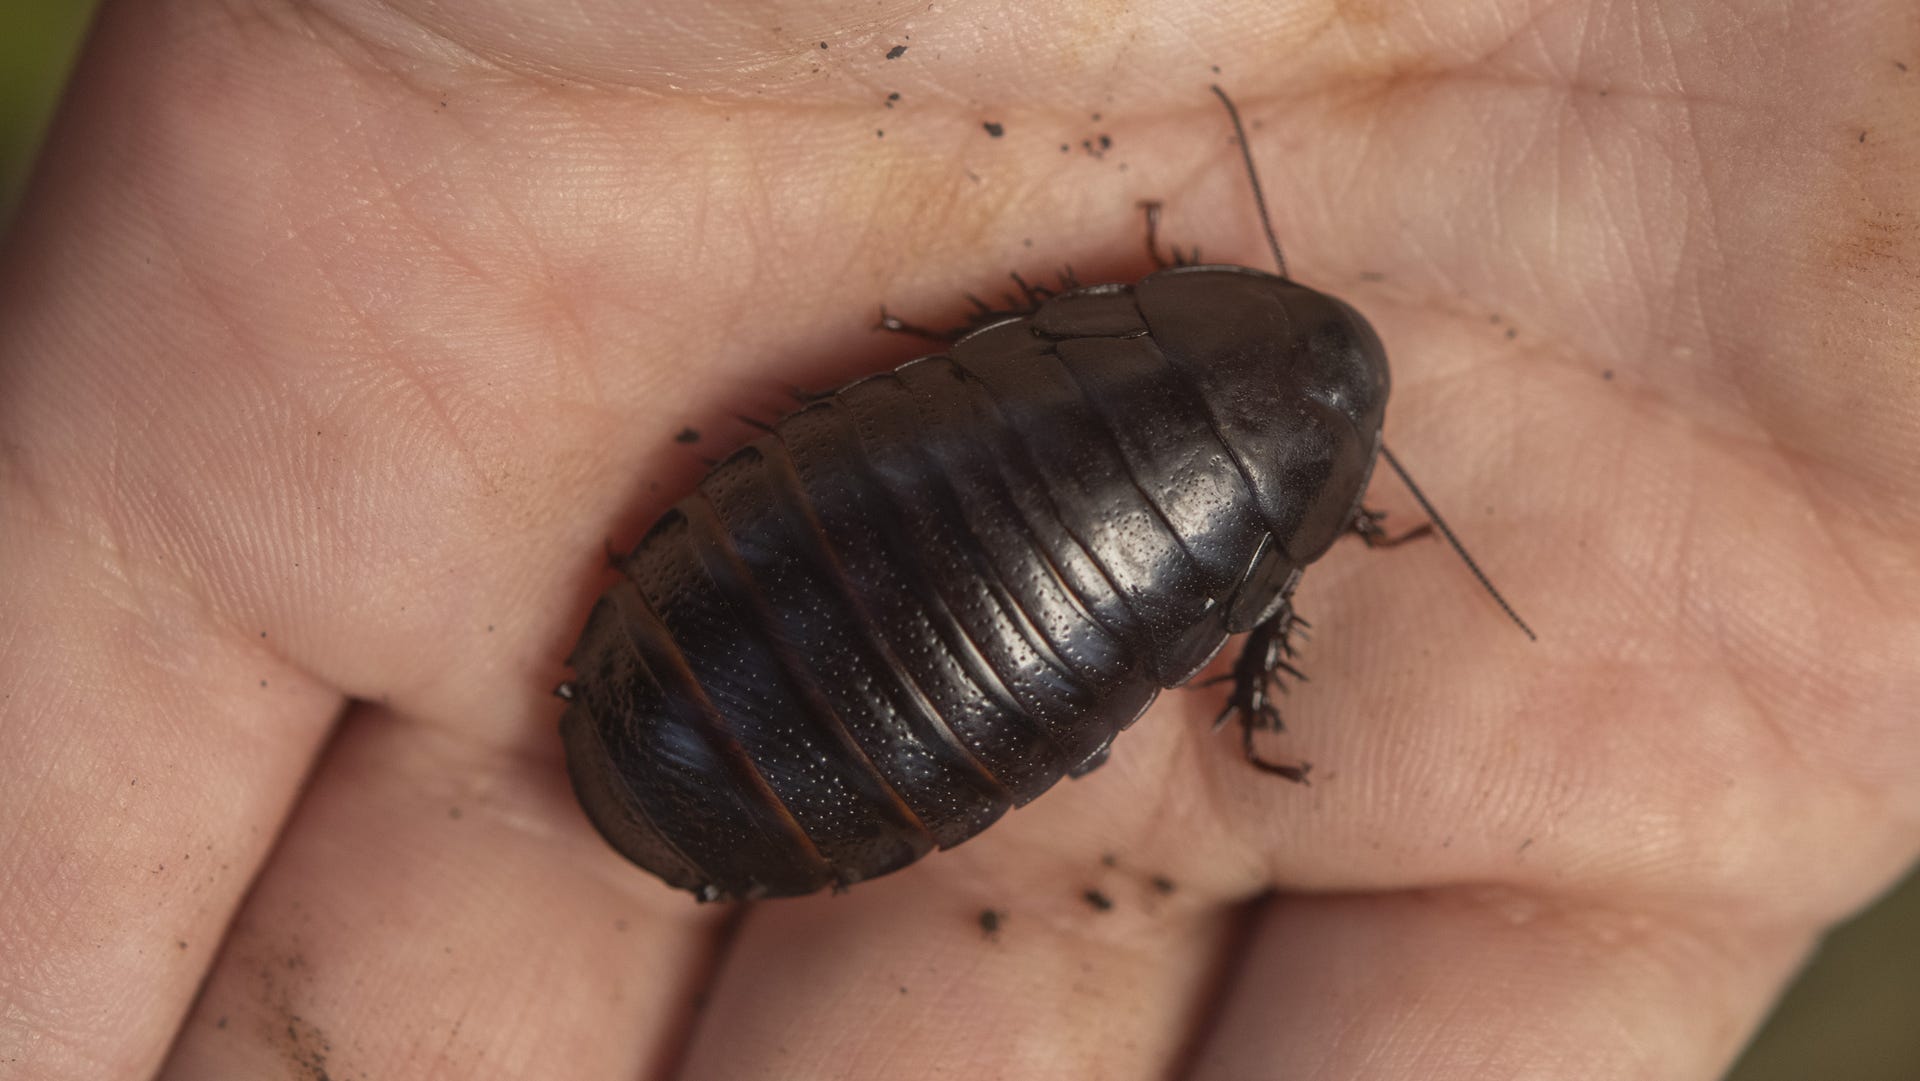 A dark, compact cockroach sits on a human palm.